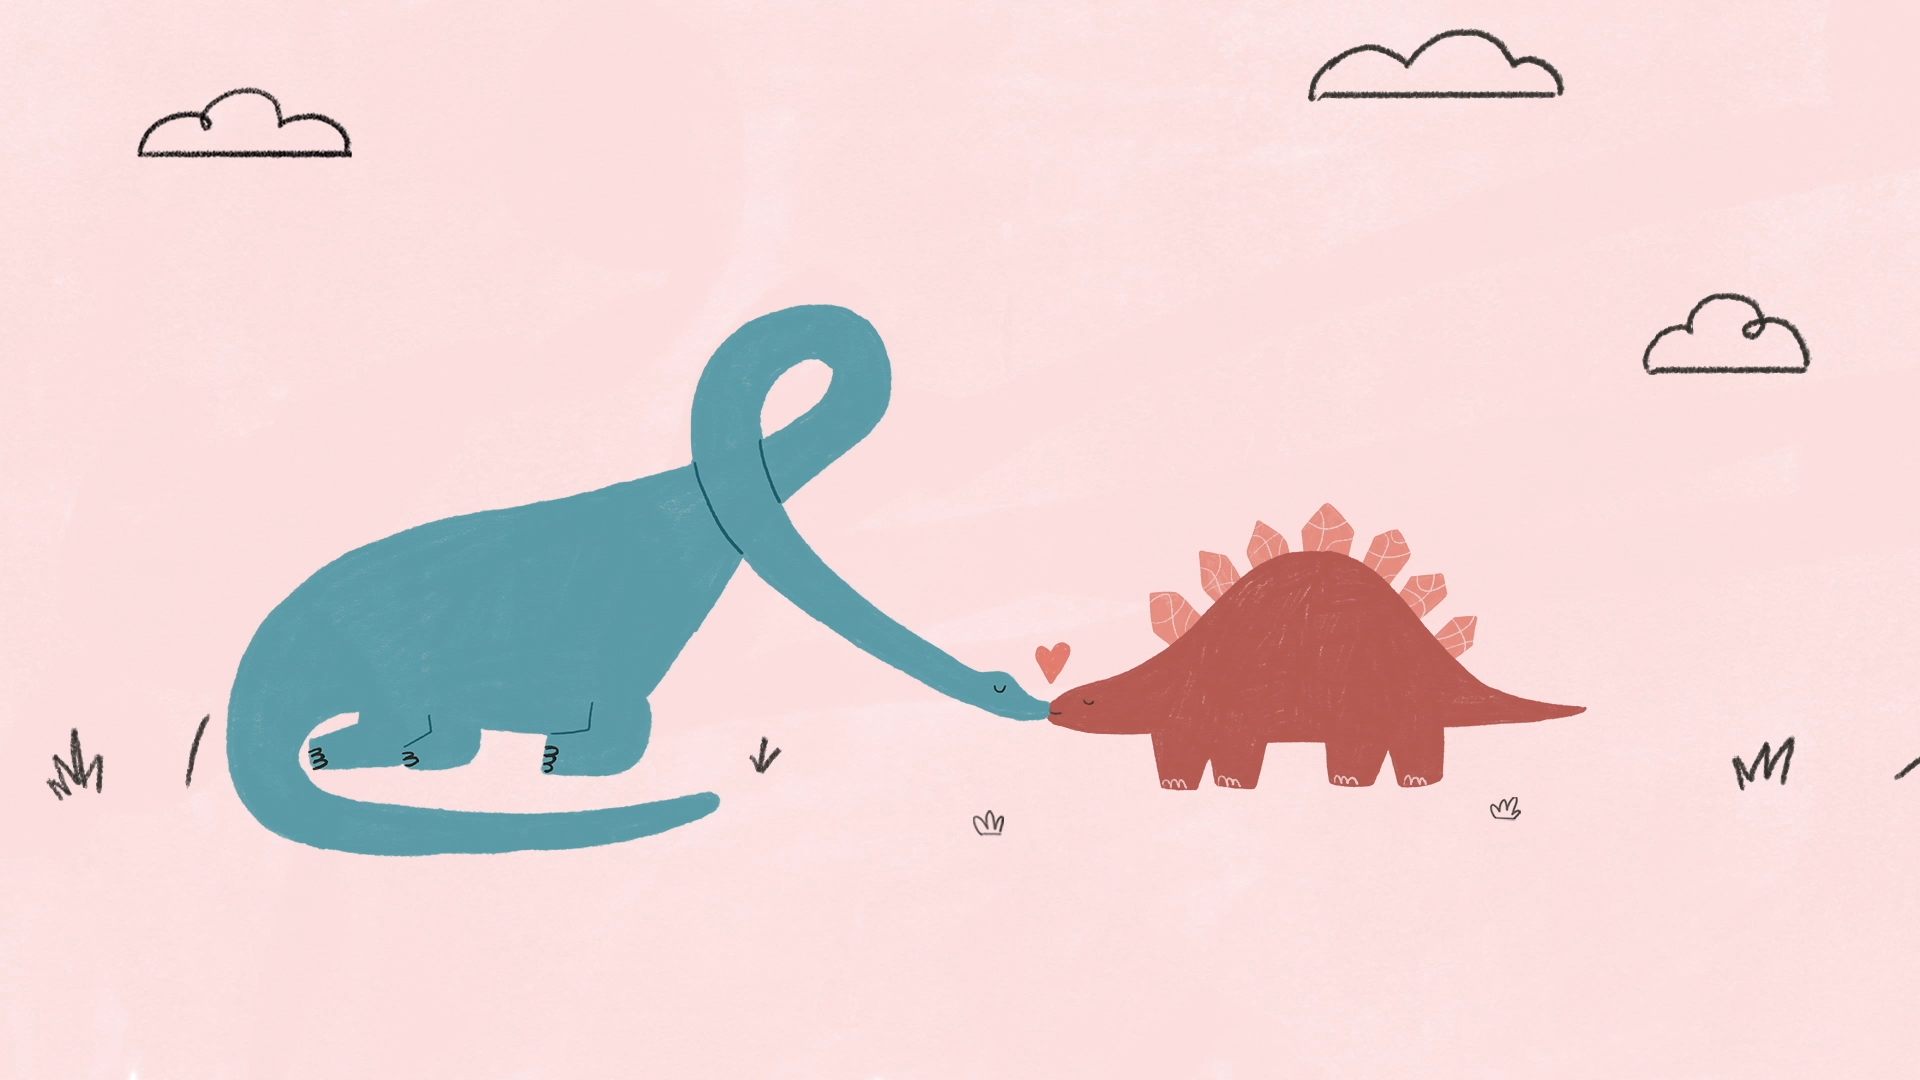 Dinosaurs In Love by Hannah Jacobs, Anna Ginsburg - Blinkink.